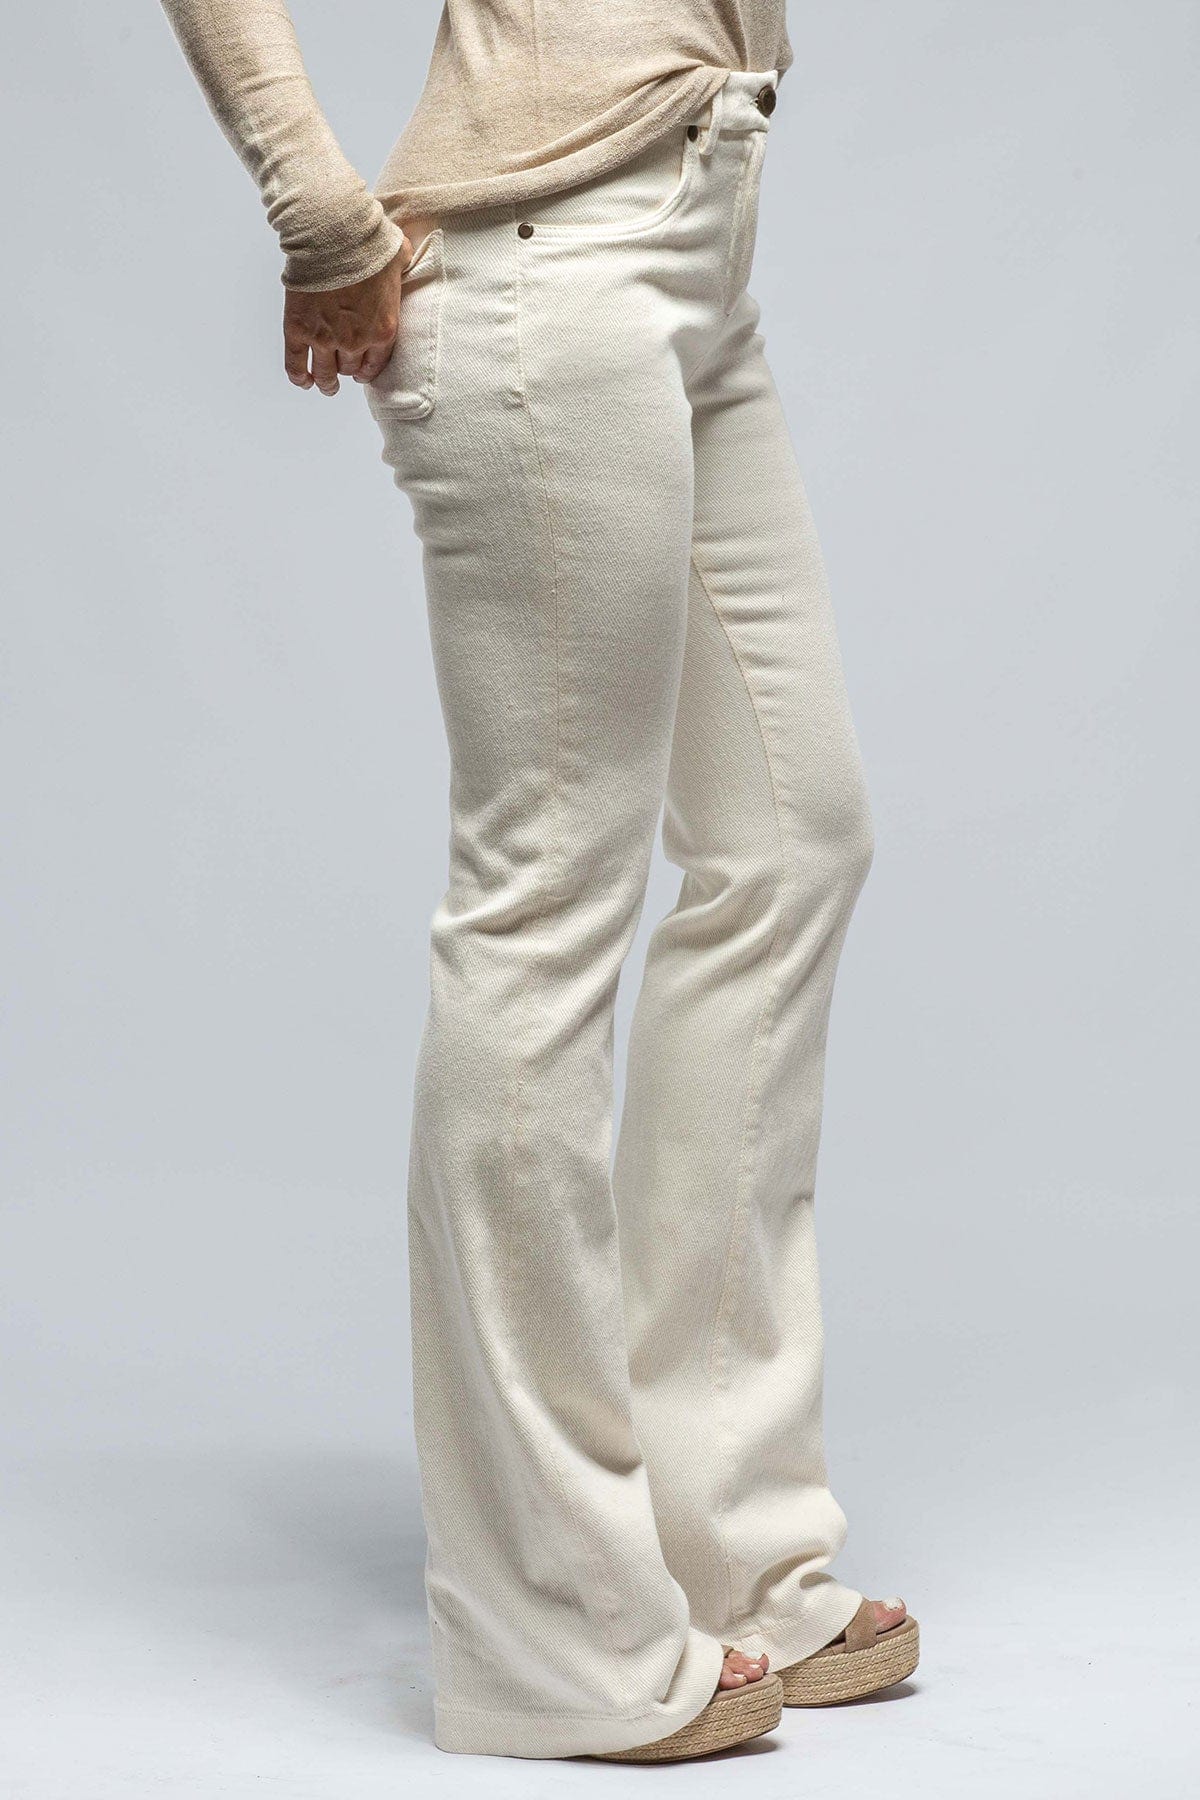 Selma Stretch Cord Flare Pant In White - AXEL'S